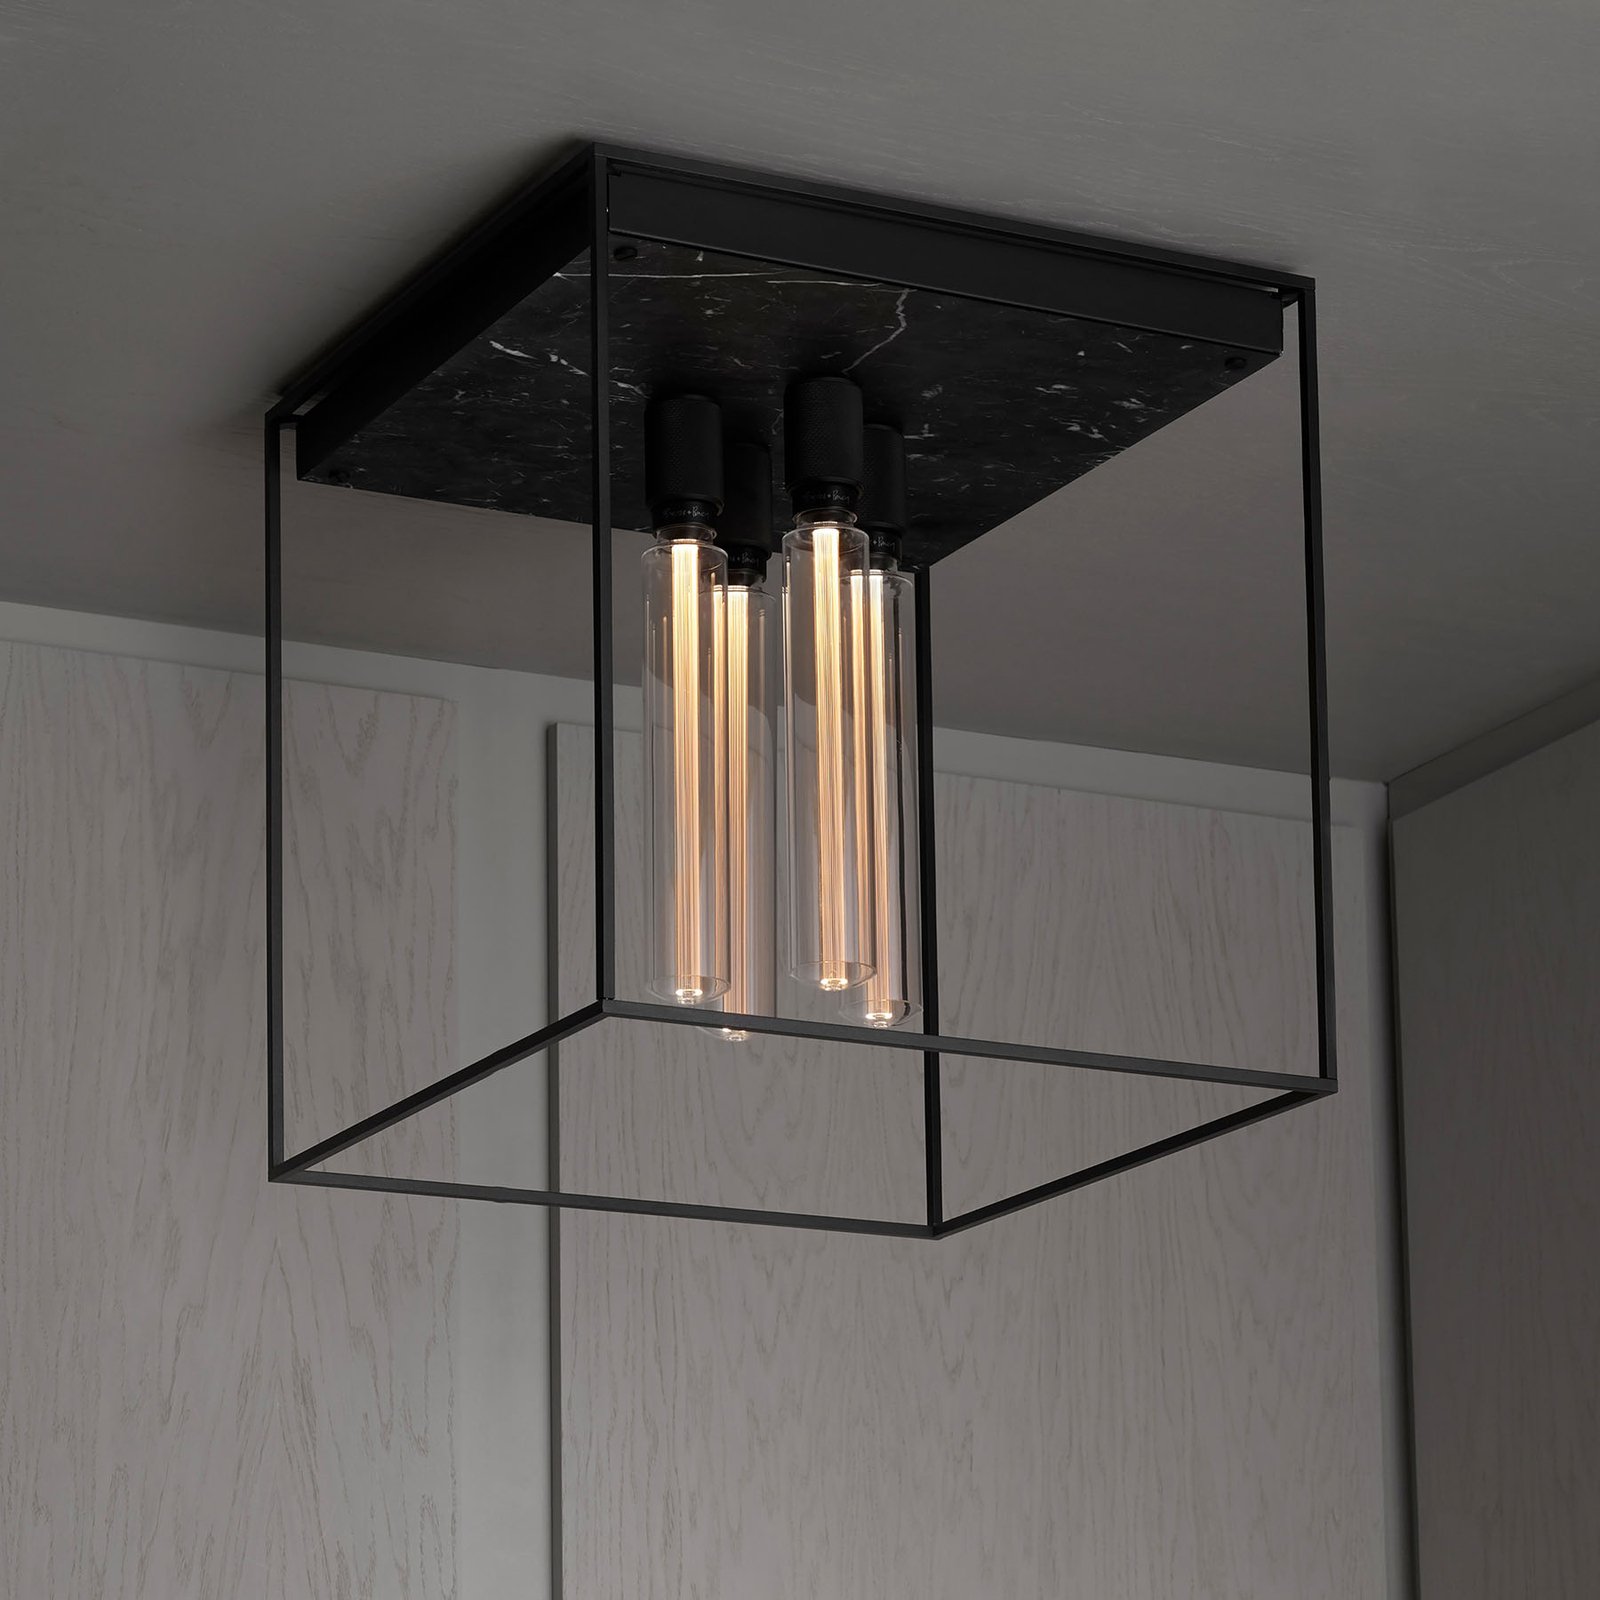 Buster + Punch Caged Ceiling 4.0 LED marmo black